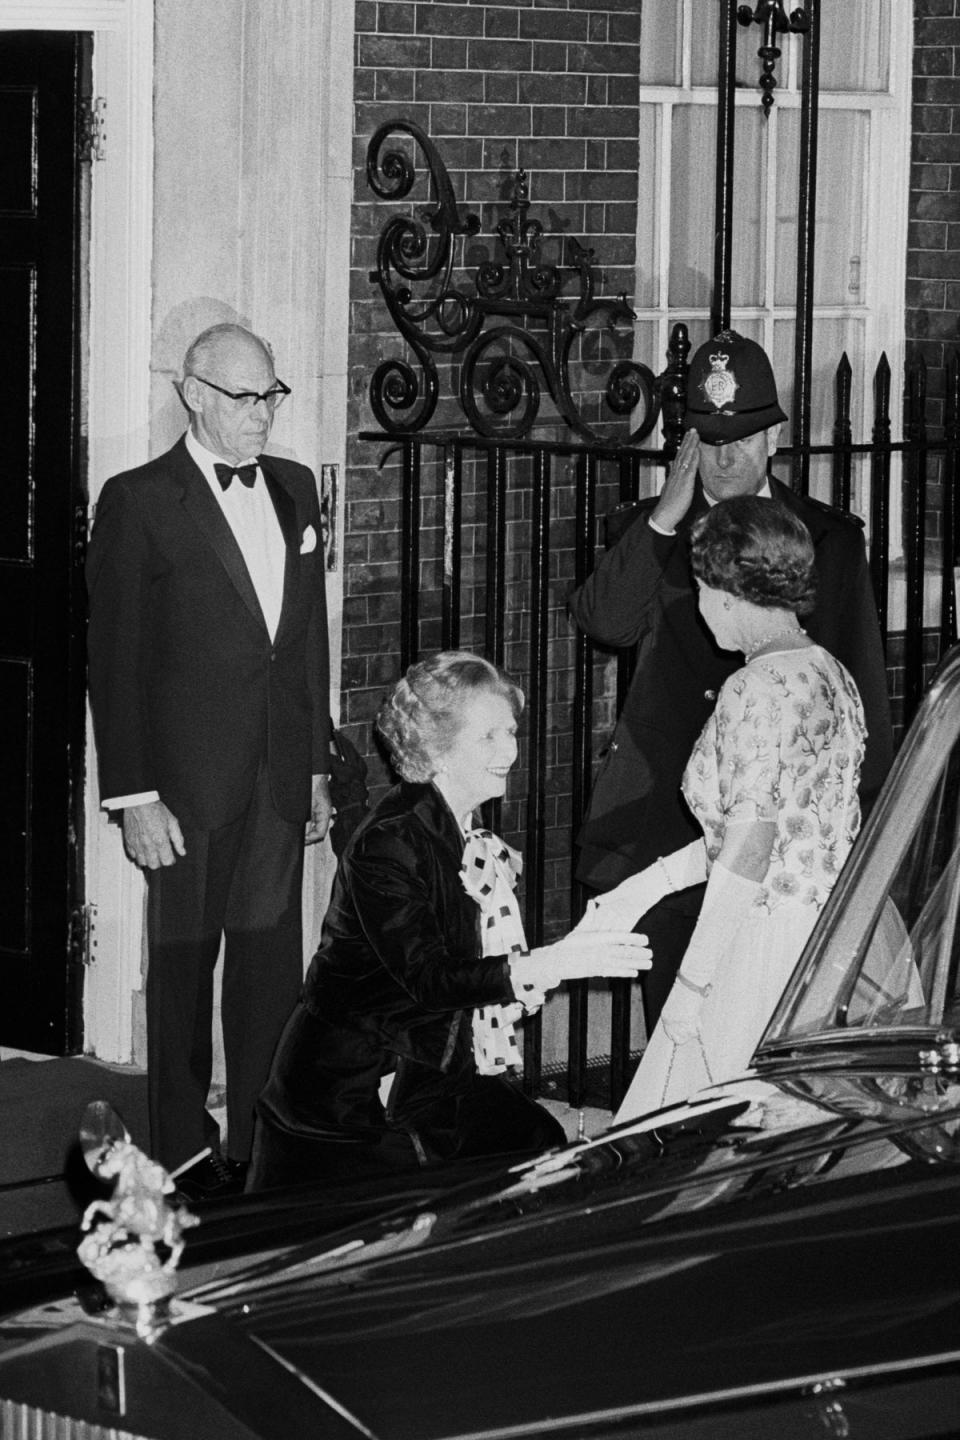 Margaret Thatcher curtseying to the Queen as she arrived for a dinner at 10 Downing Street in 1985 (PA) (PA Wire)